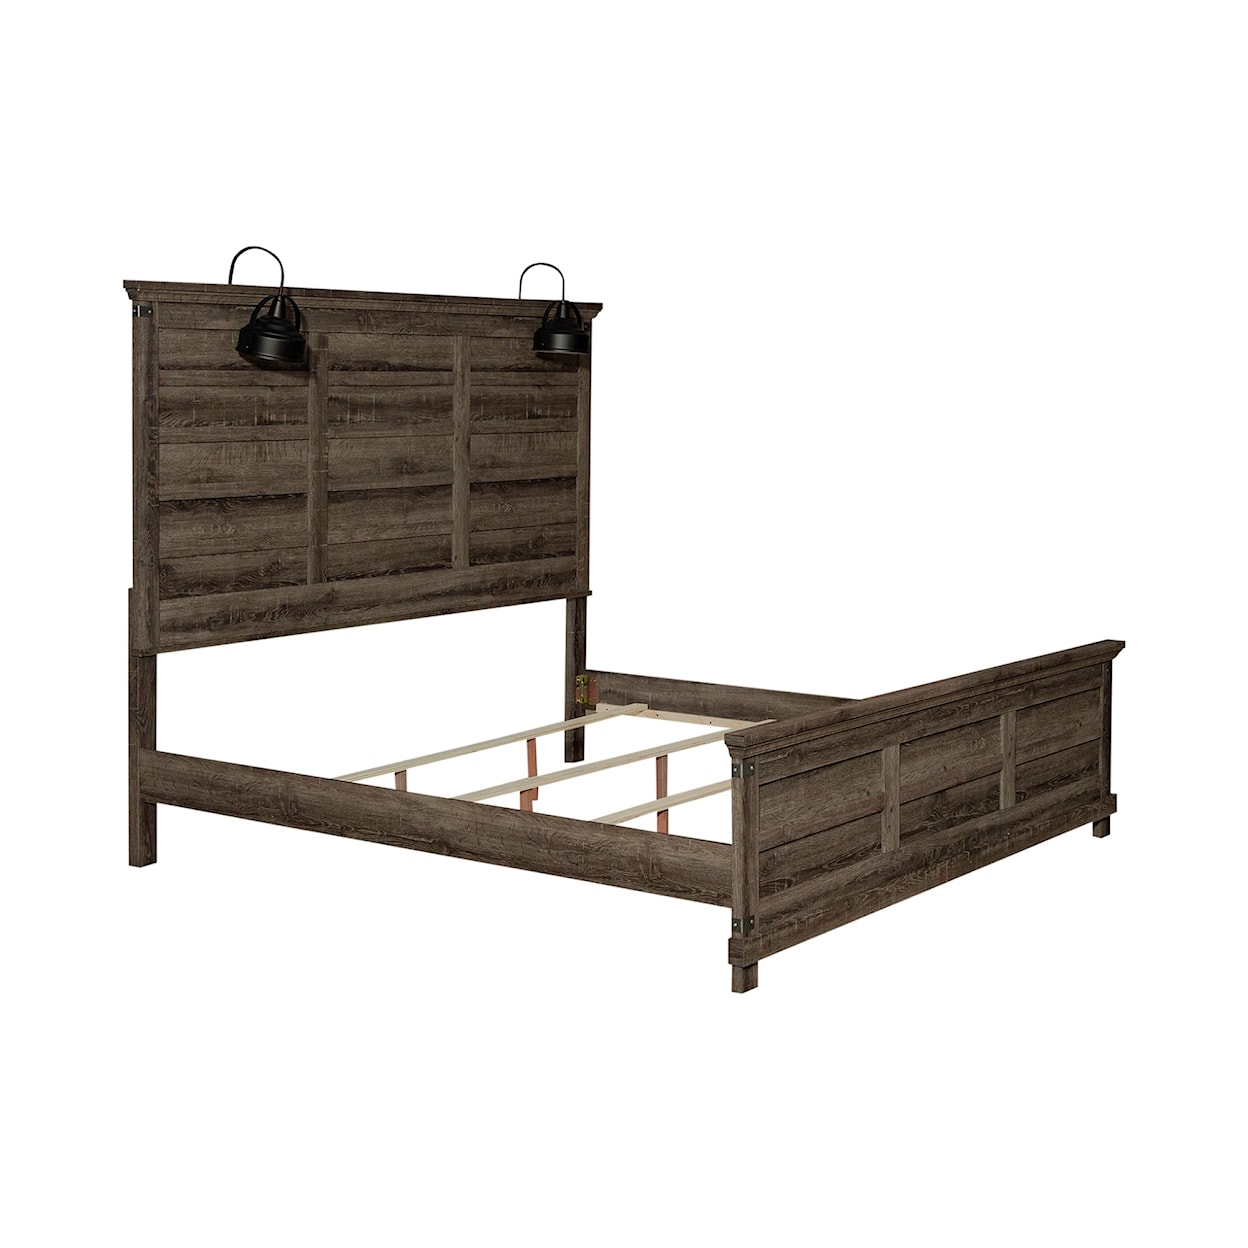 Libby Lakeside Haven 3-Piece King Bedroom Set